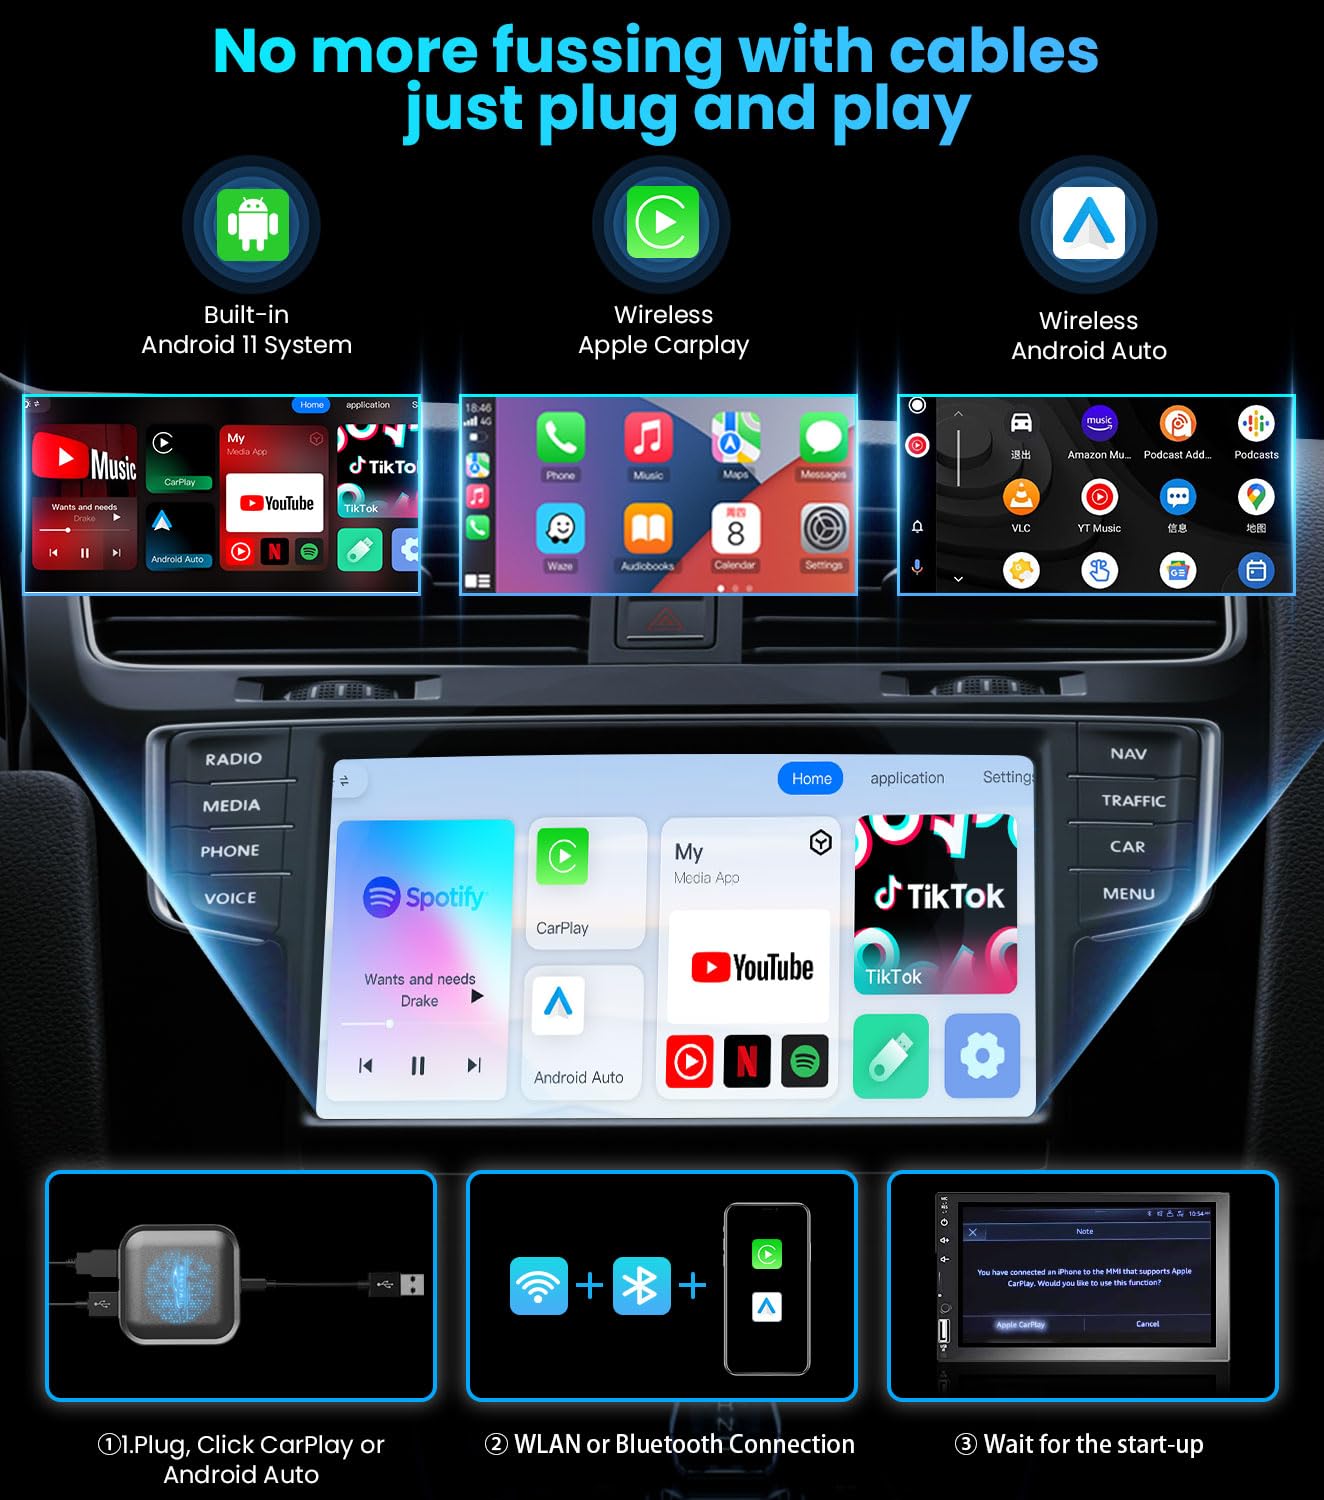 Buy TIMEKNOW Wireless Carplay Magic Box Adapter with Netflix   Tiktok, Upgrade LED Wireless Android Auto Adapter HDMI Dongle for Phone to  Miracast/Stream Media to Car/TV, for OEM Wired CarPlay Car